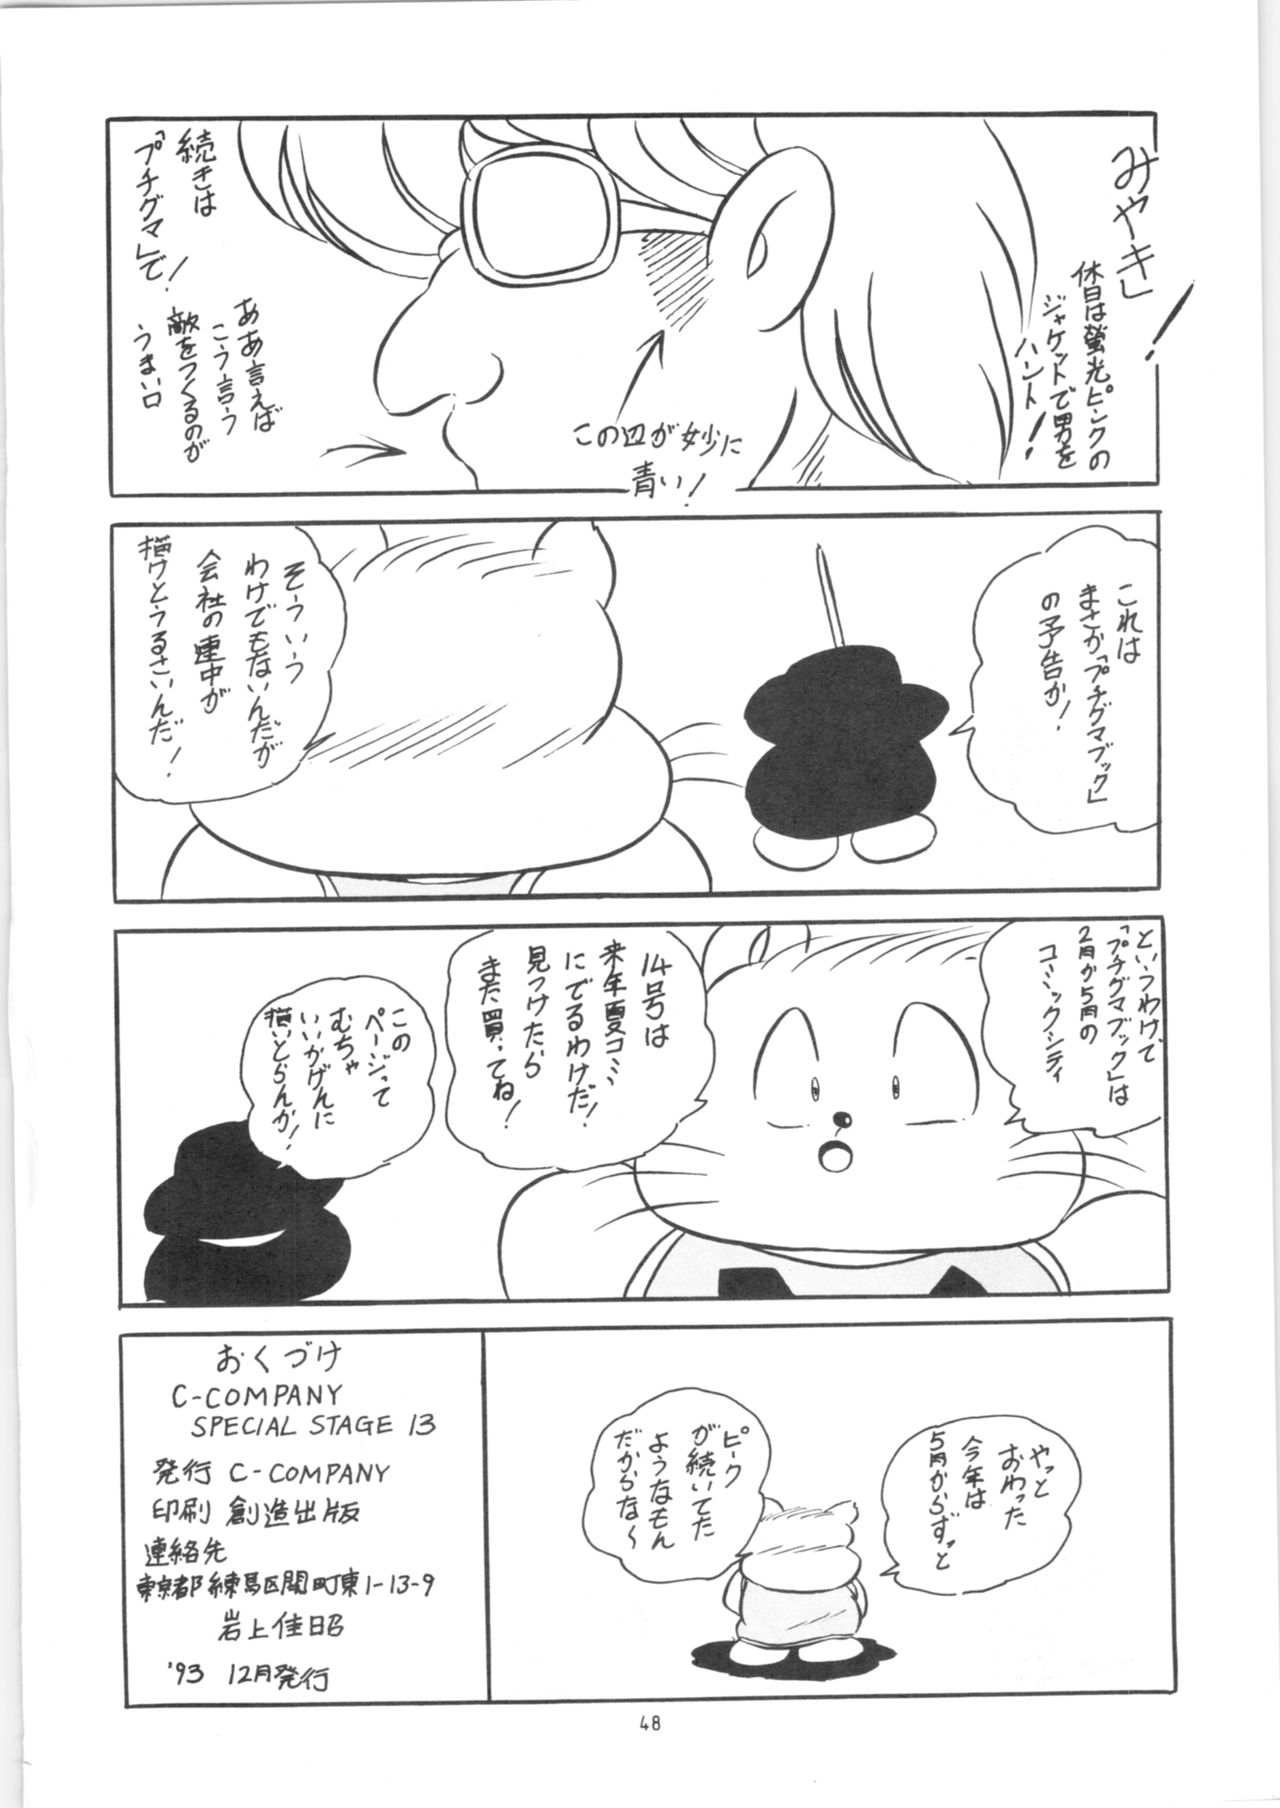 [C-COMPANY] C-COMPANY SPECIAL STAGE 13 (Ranma 1/2) page 49 full